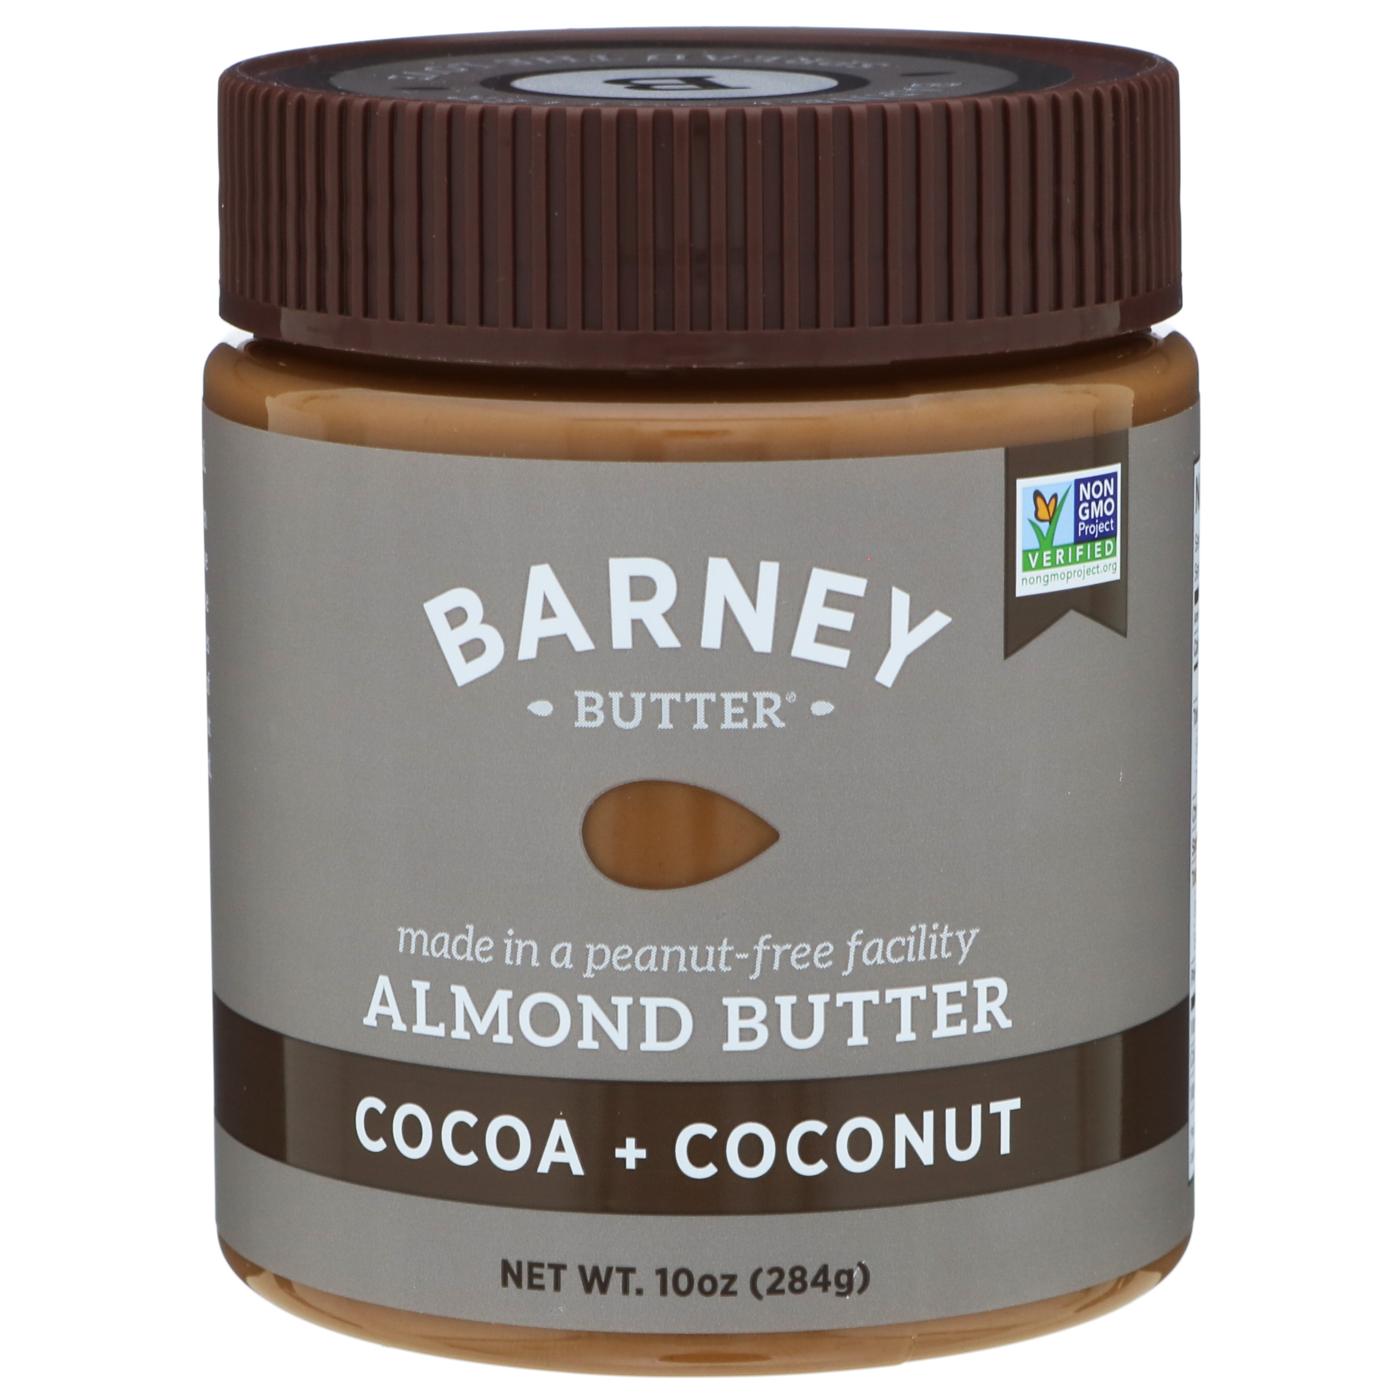 Barney Butter Almond Butter - Cocoa + Coconut; image 1 of 2